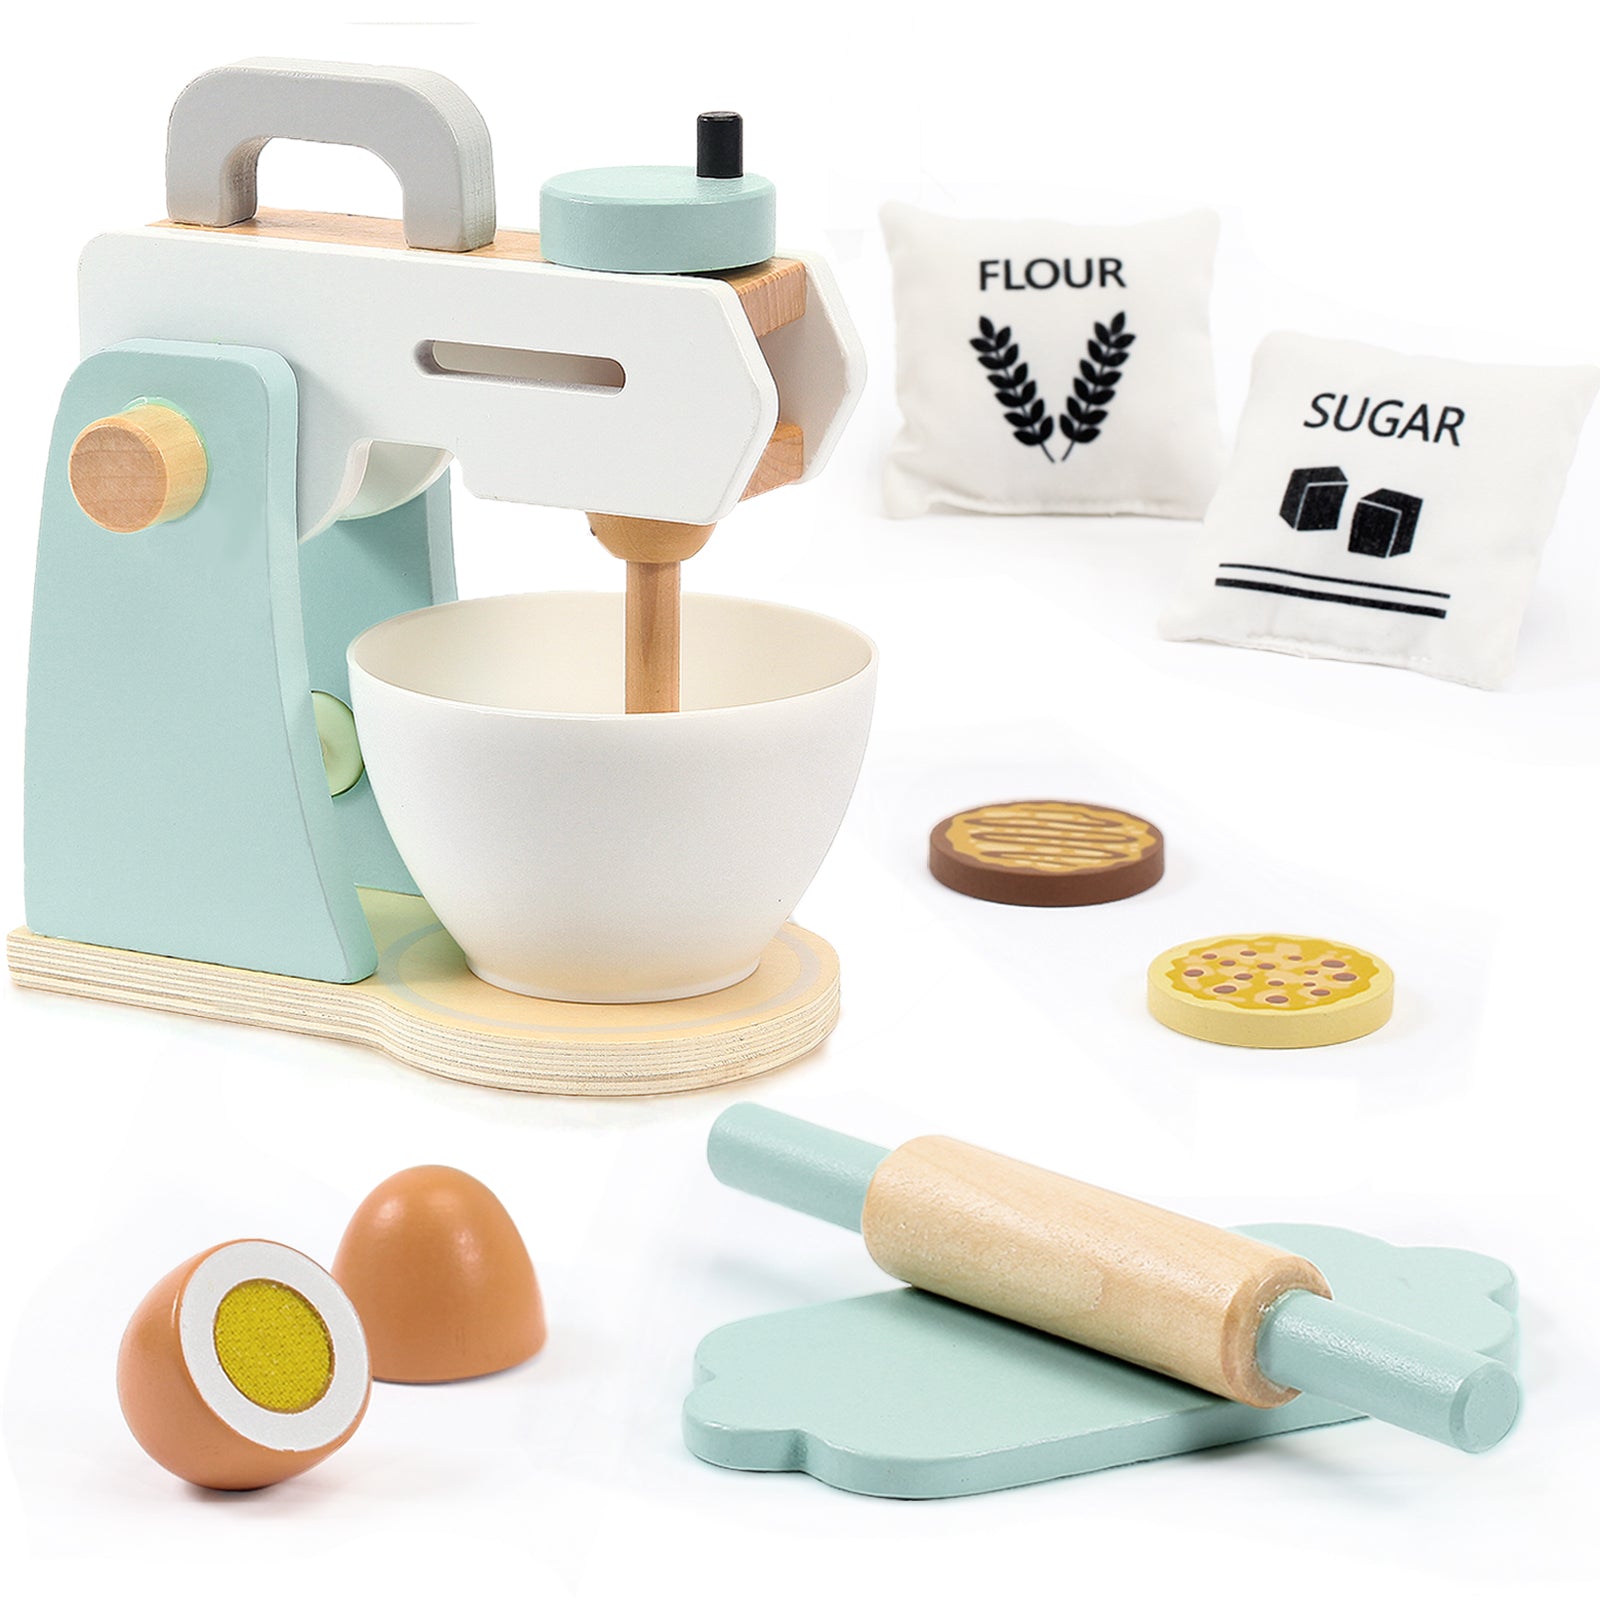 Play Kitchen Accessories, Frogprin Wooden Toy Mixer Set, Pretend Play